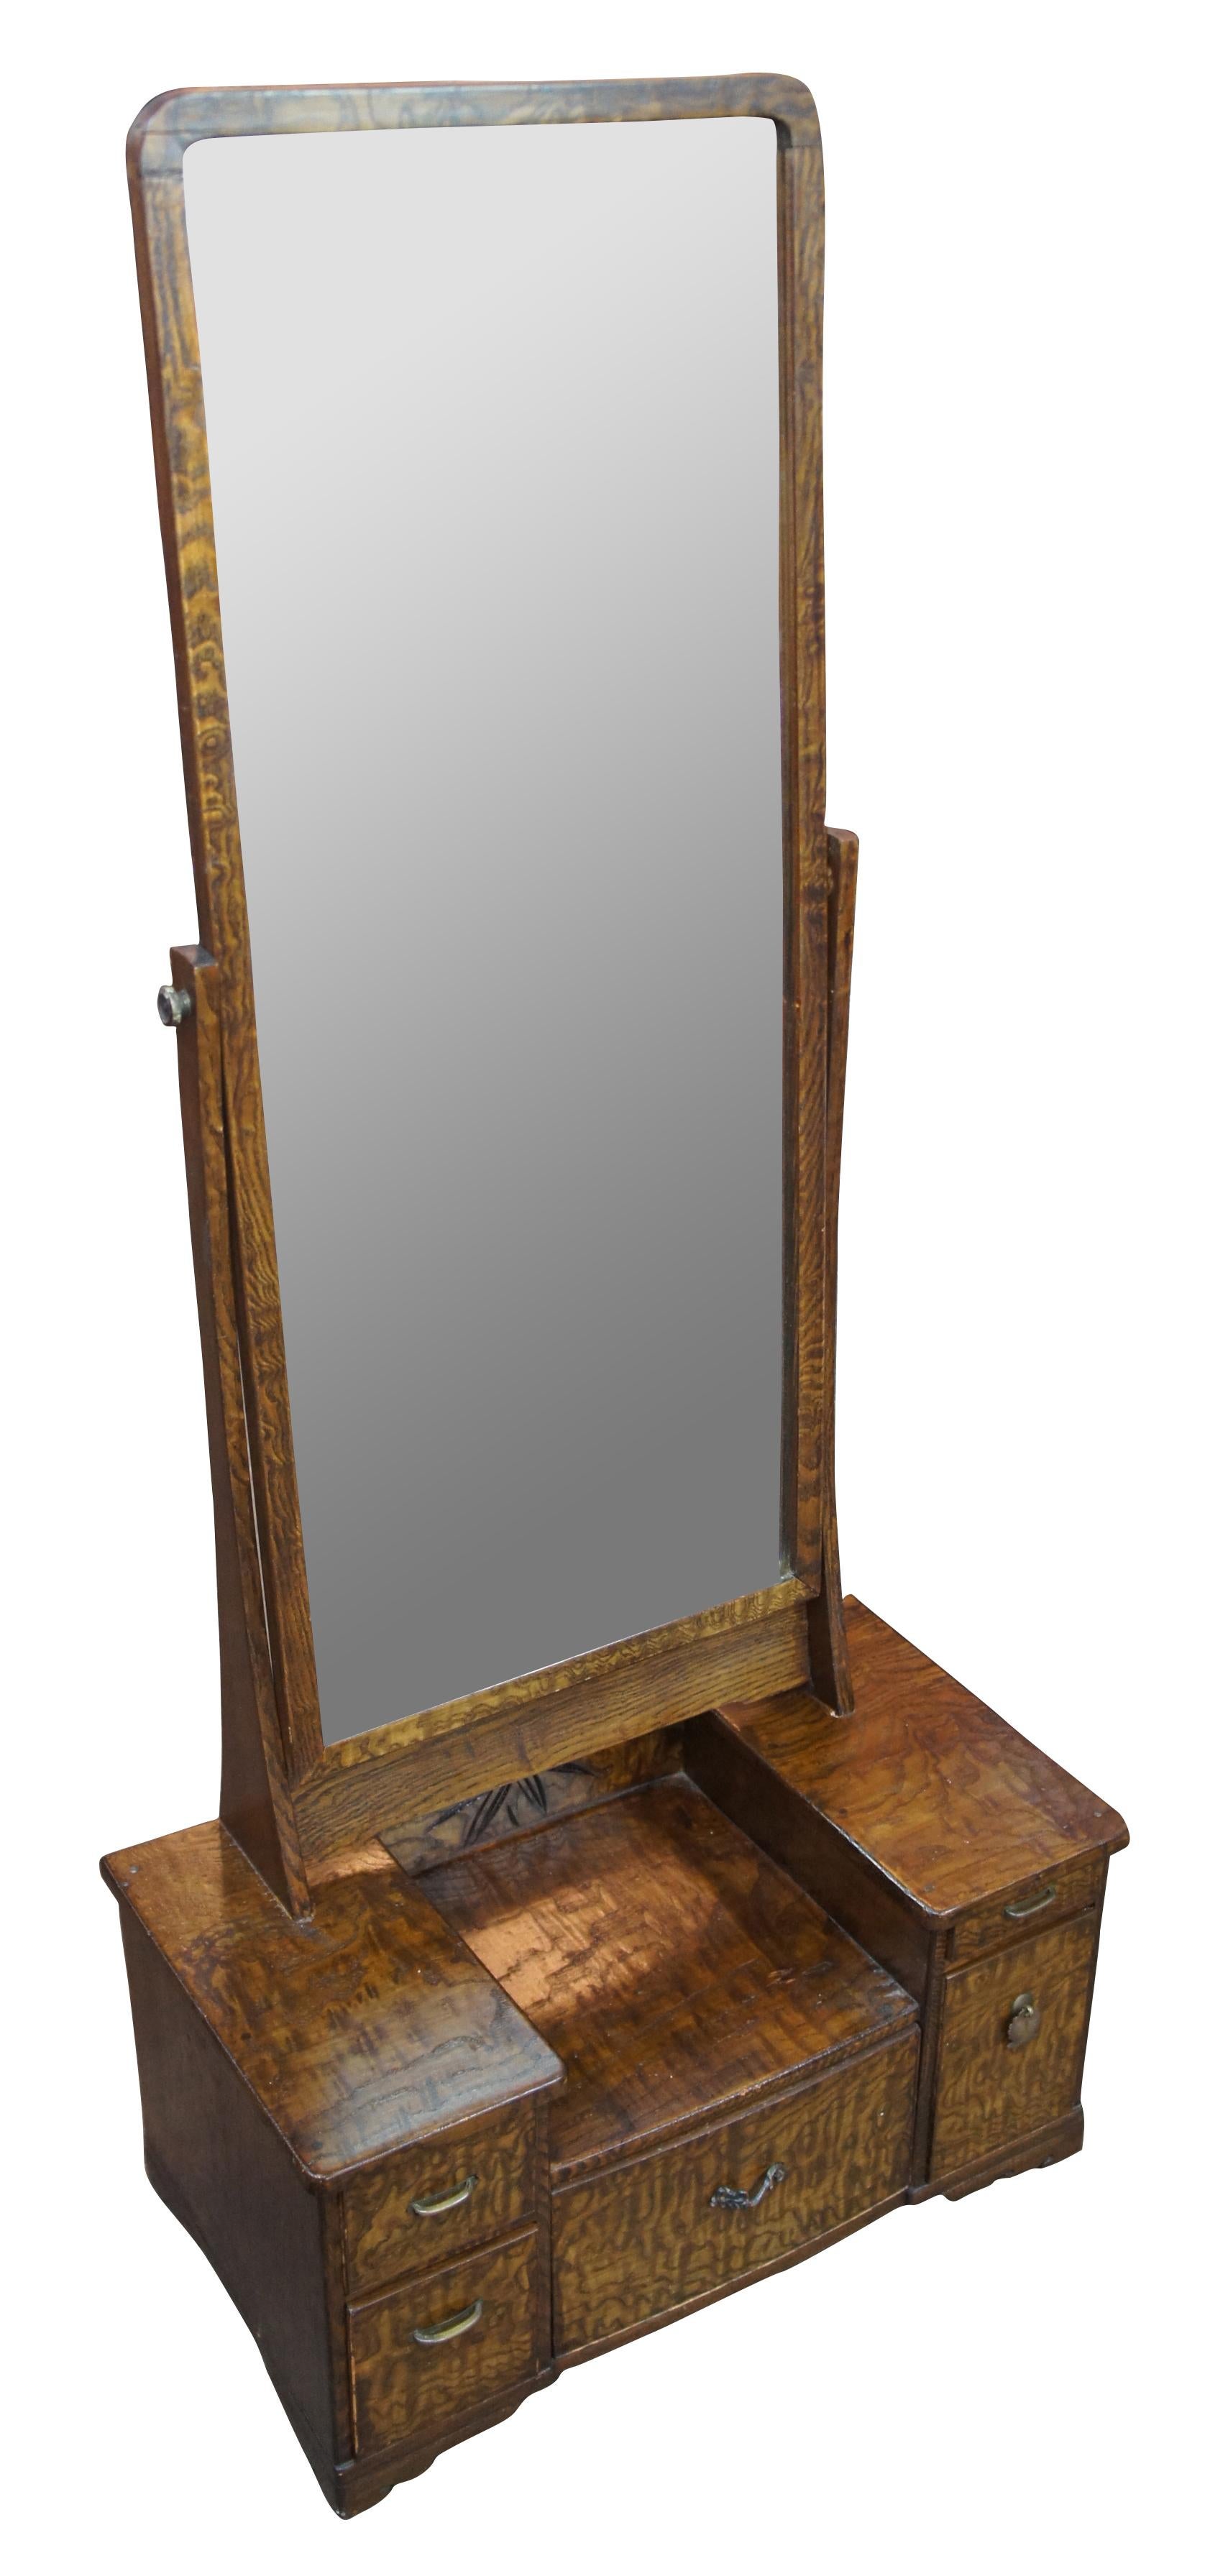 Antique late Meiji Period Japanese Tansu Kyodai or Sanmenkyo. The squat base with drawers is meant to hold cosmetics; coupled with a disproportionately long mirror, the piece is designed to placed on the floor to apply makeup and to style hair while